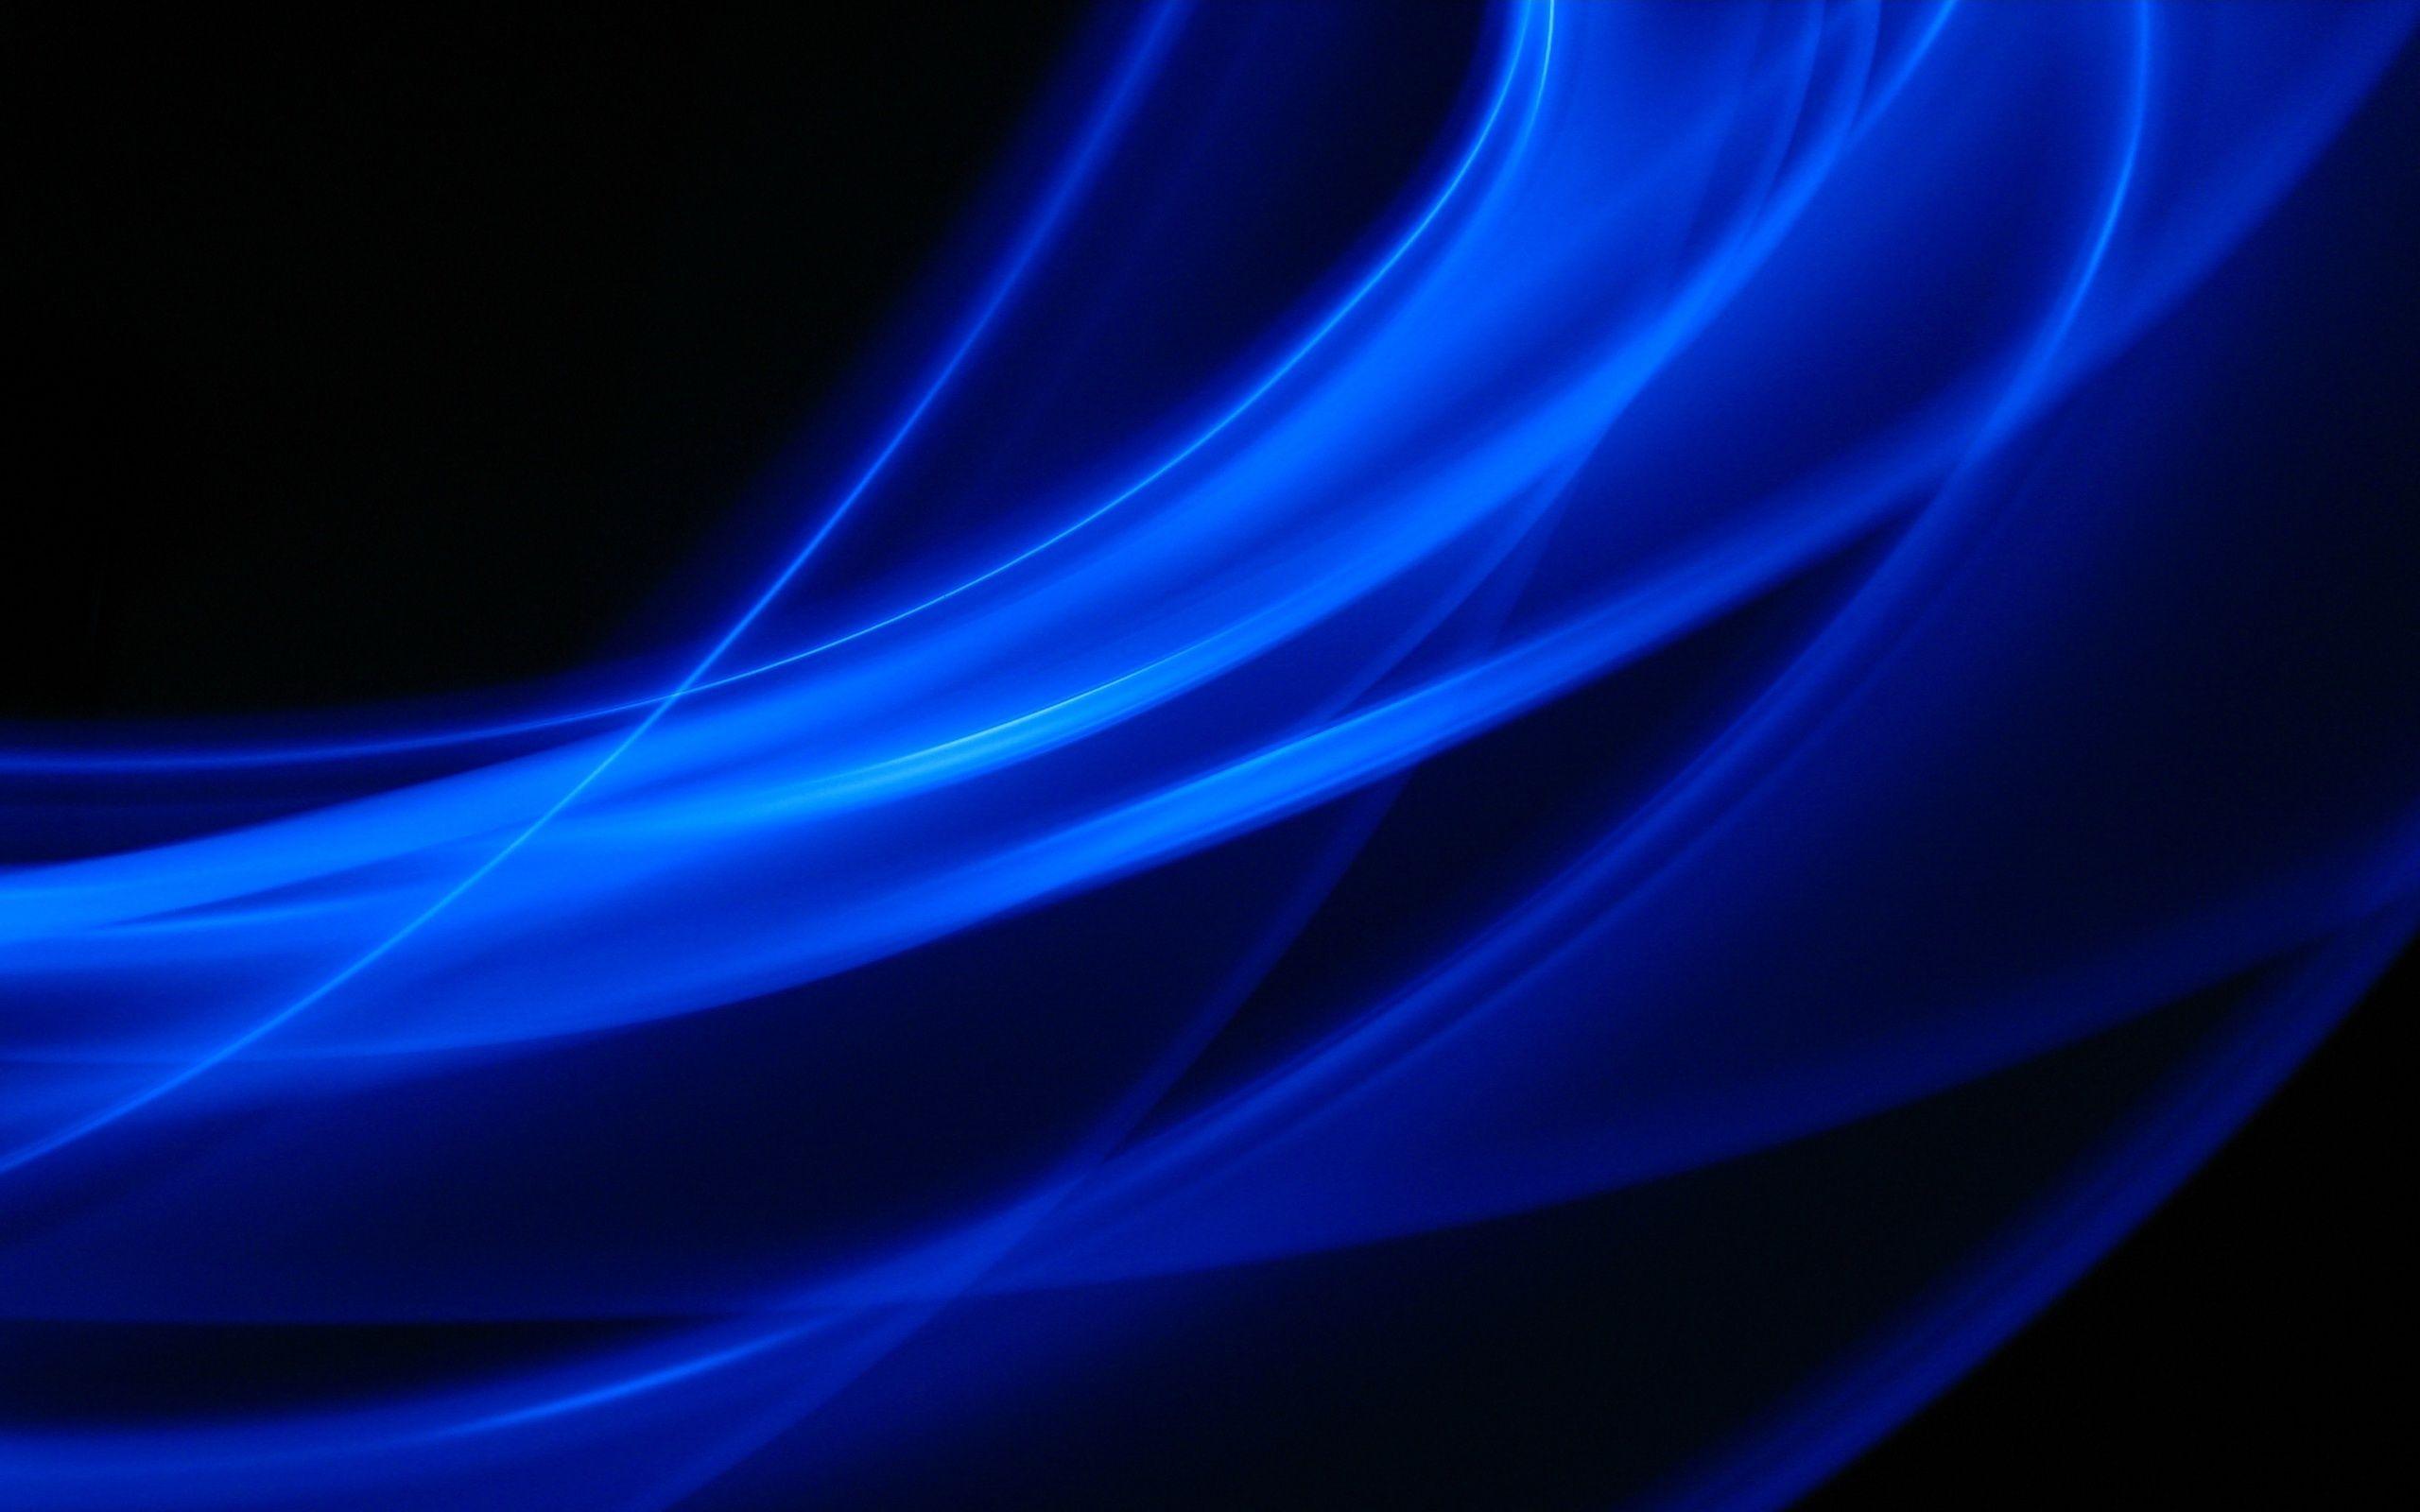 Dark Blue Abstract Backgrounds Widescreen 2 HD Wallpapers